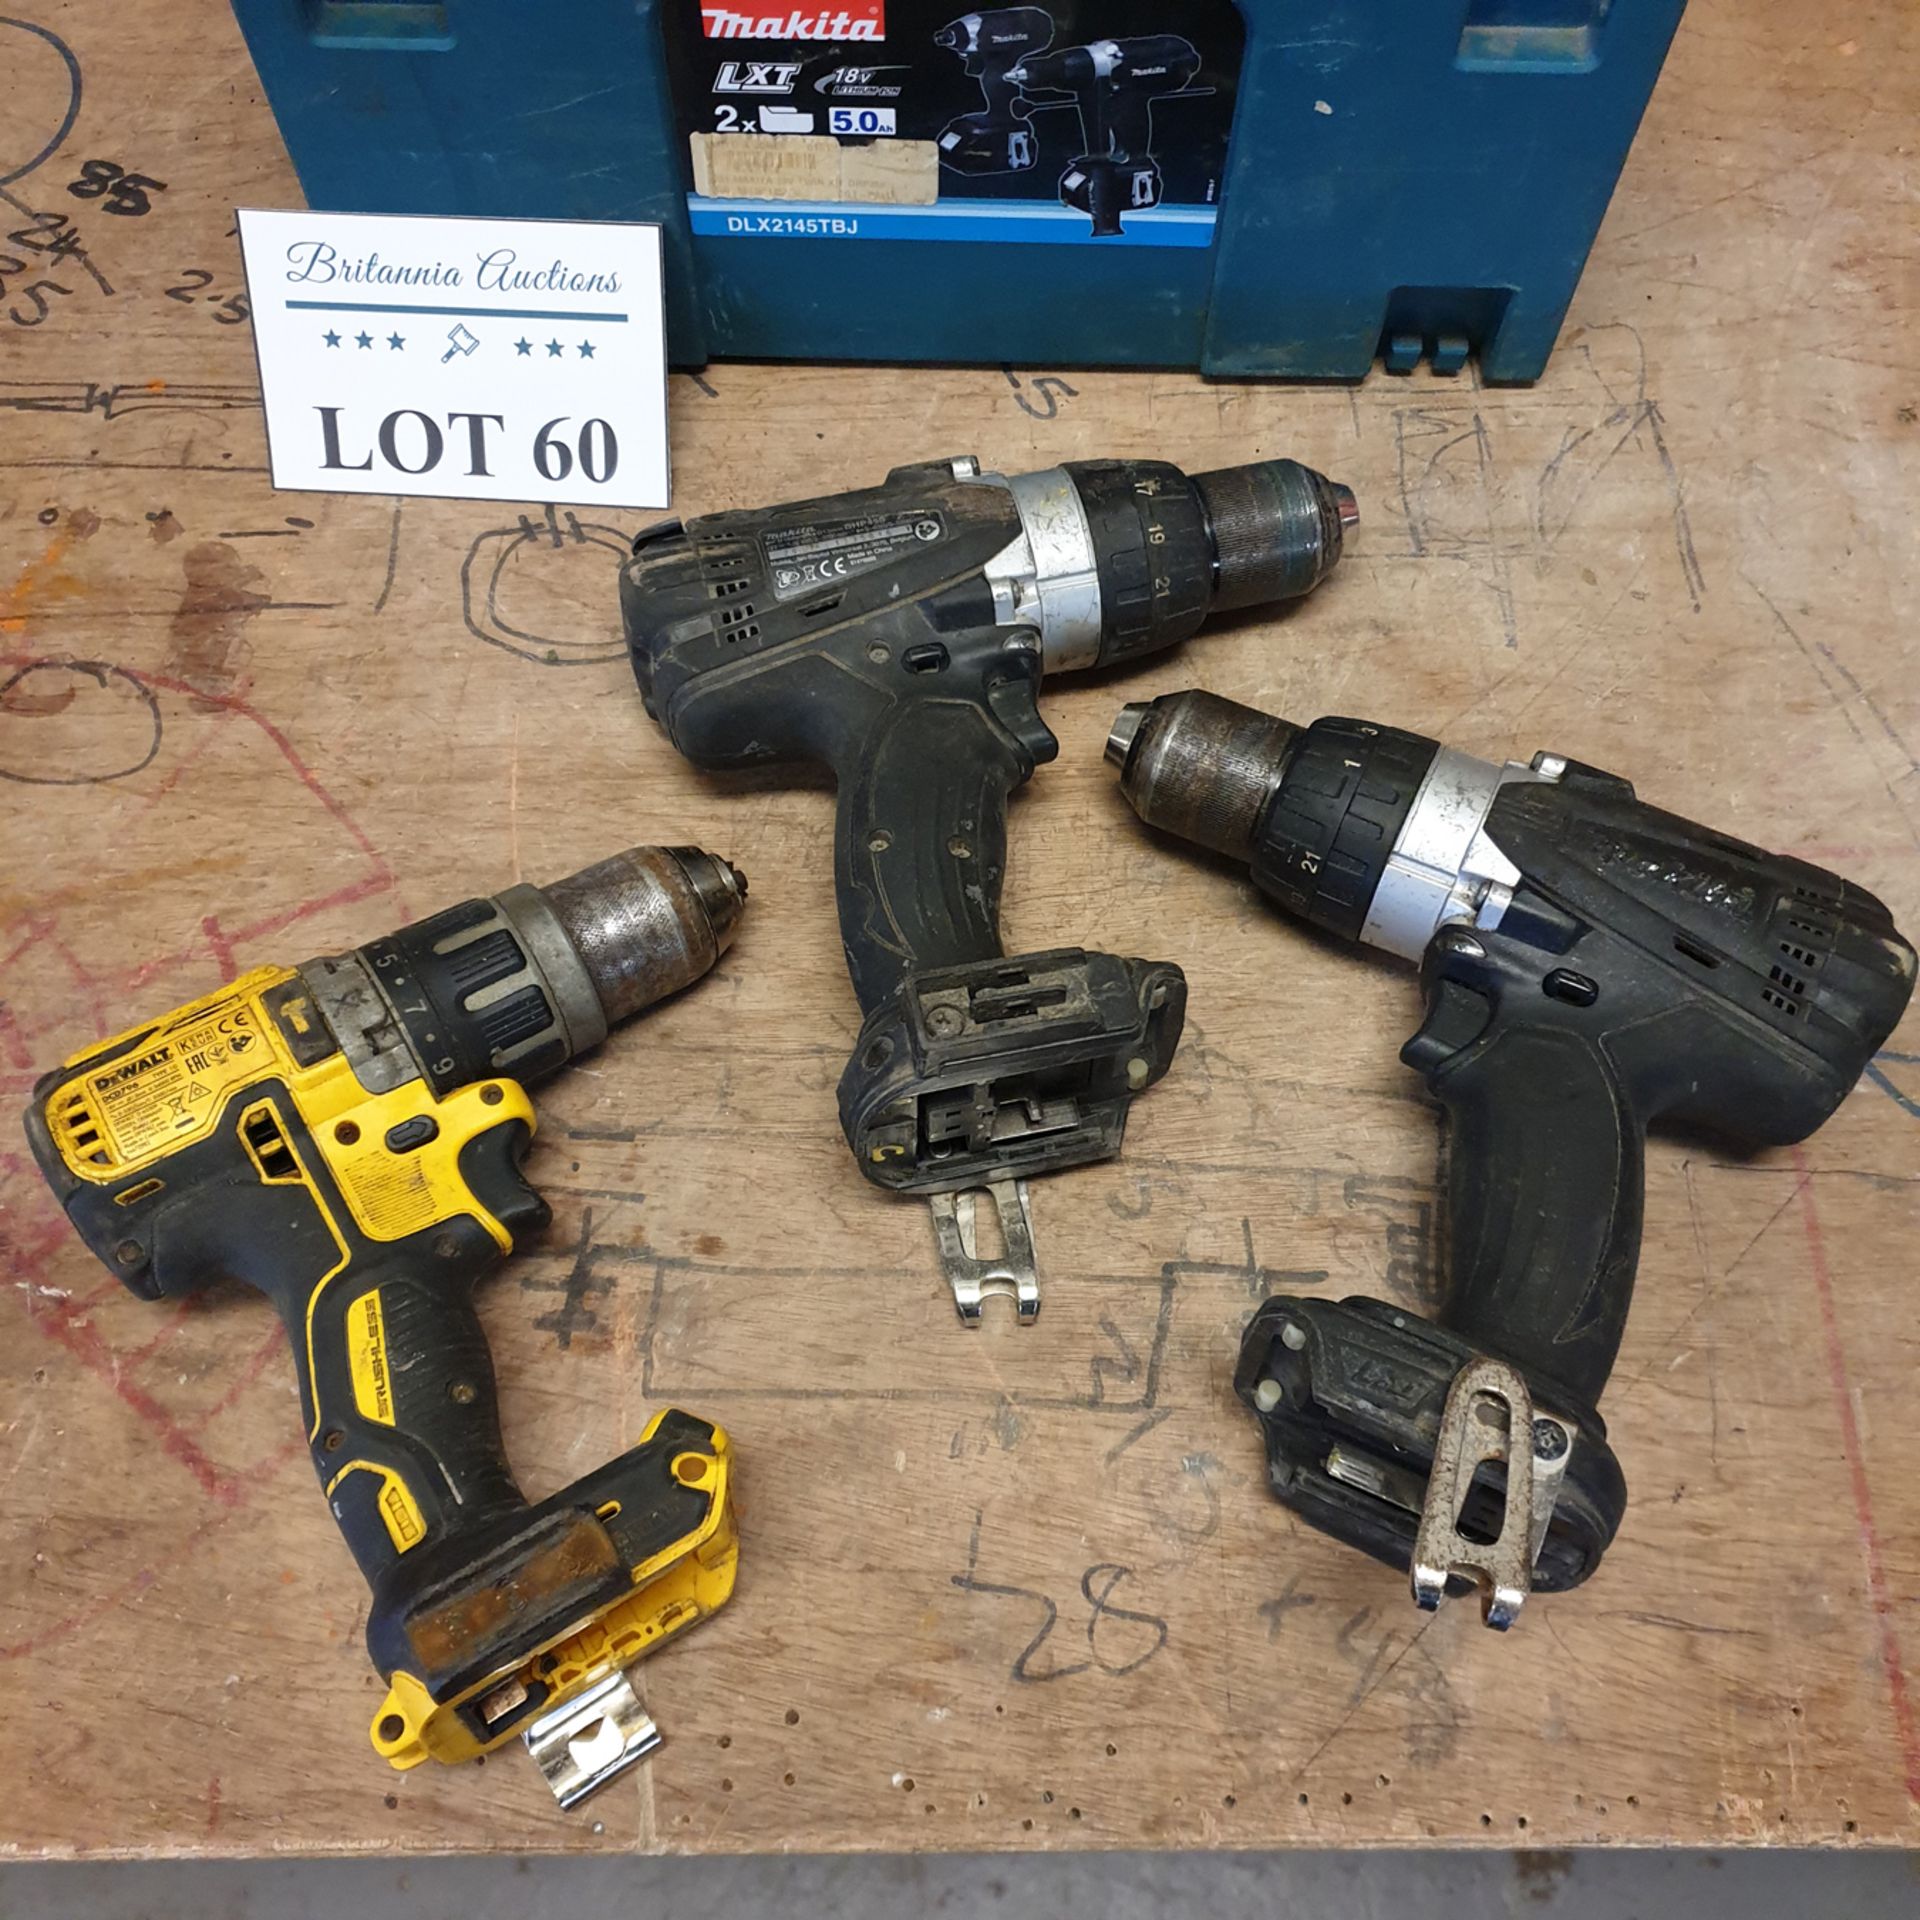 3 x Hand Drill Units - No Batteries Included. - Image 2 of 3